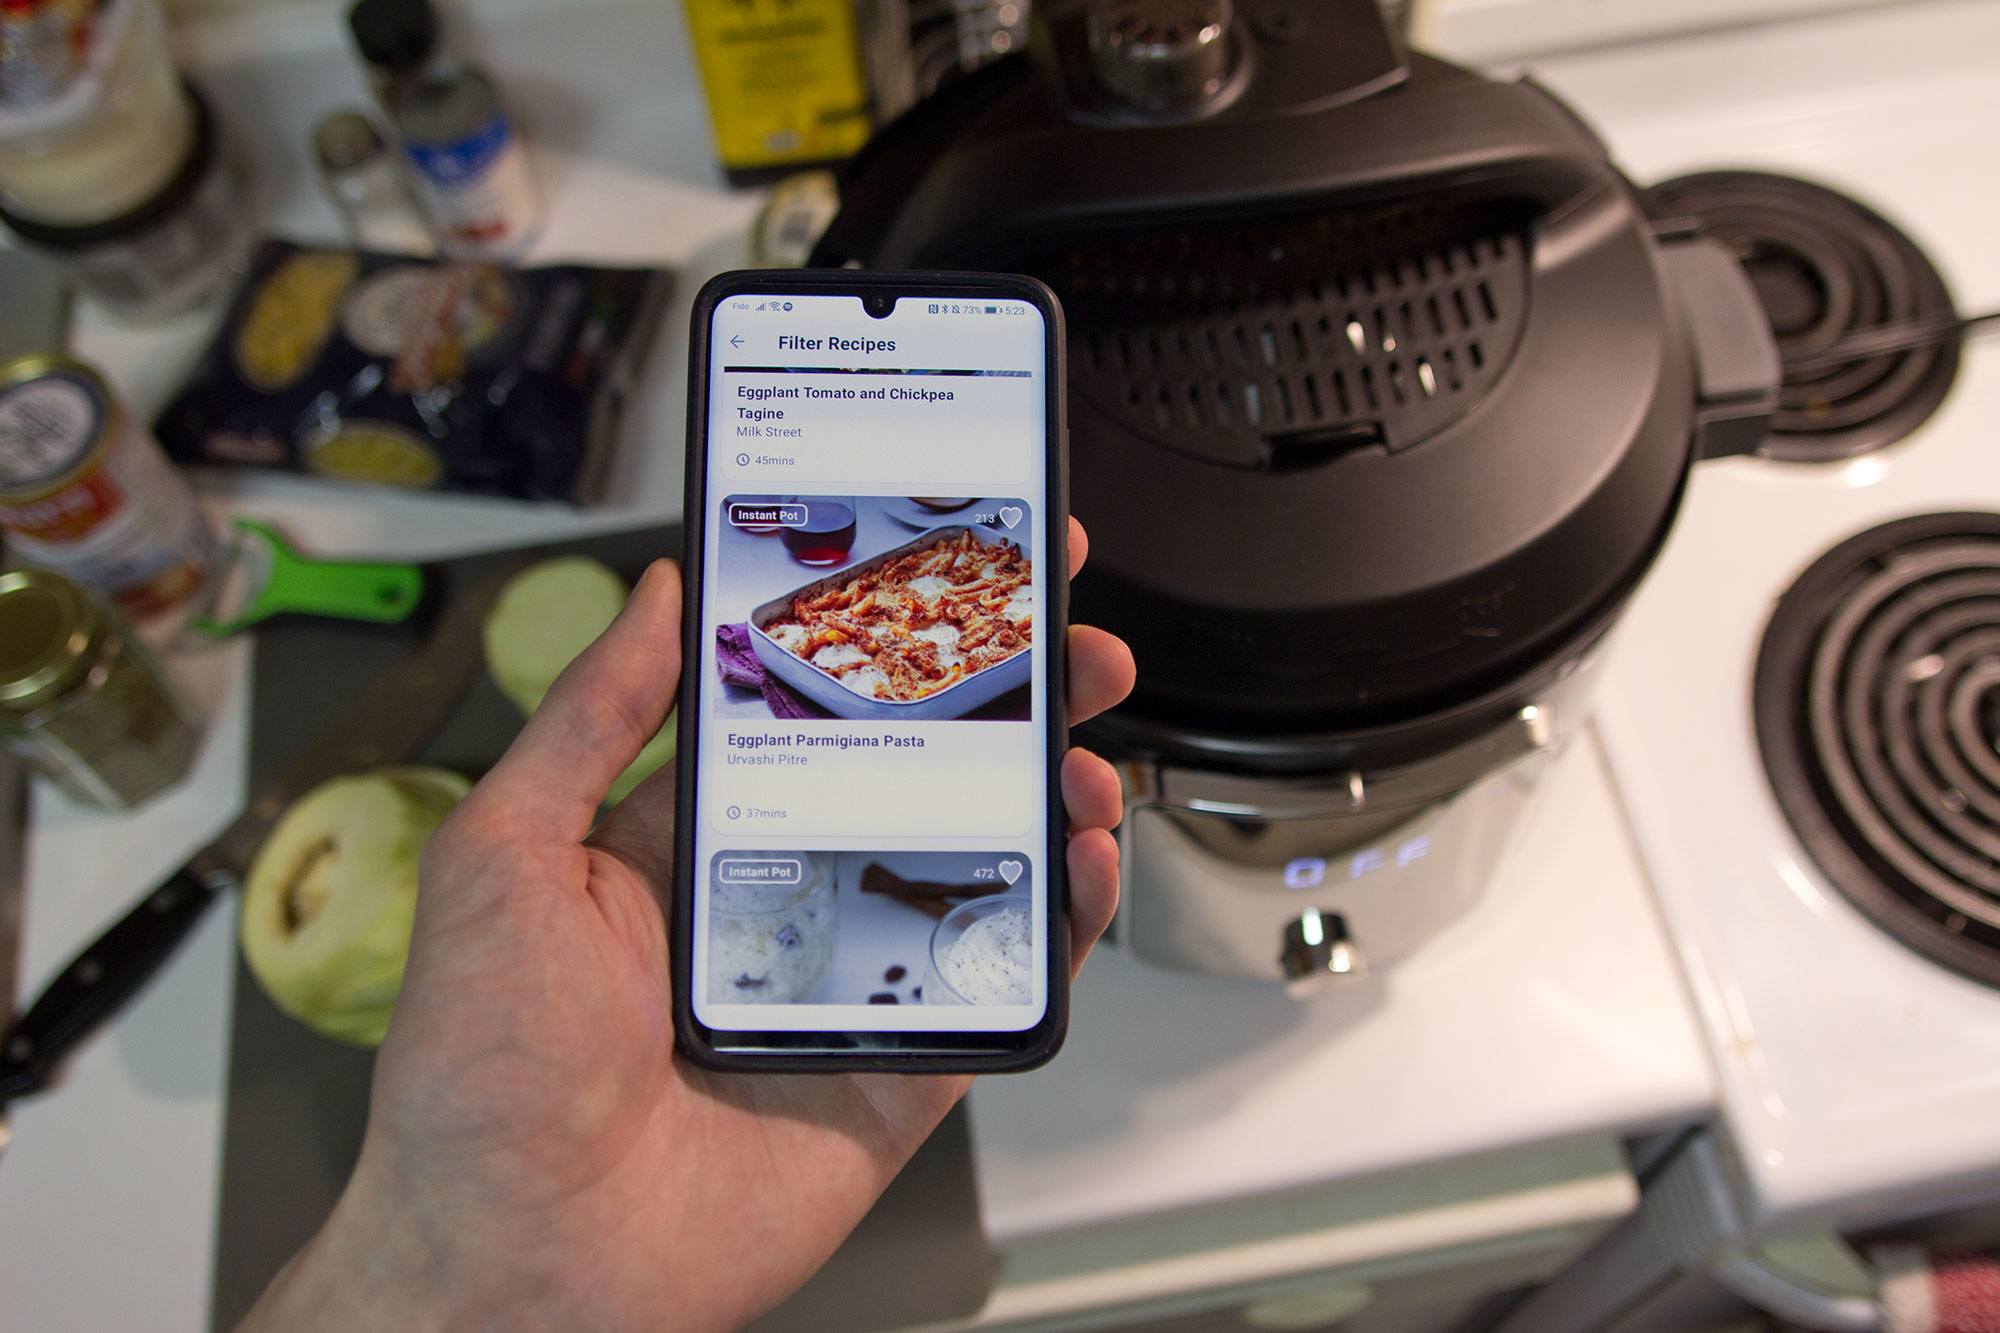 Instant Pot Pro Plus Lets You Pressure Cook With Mobile App